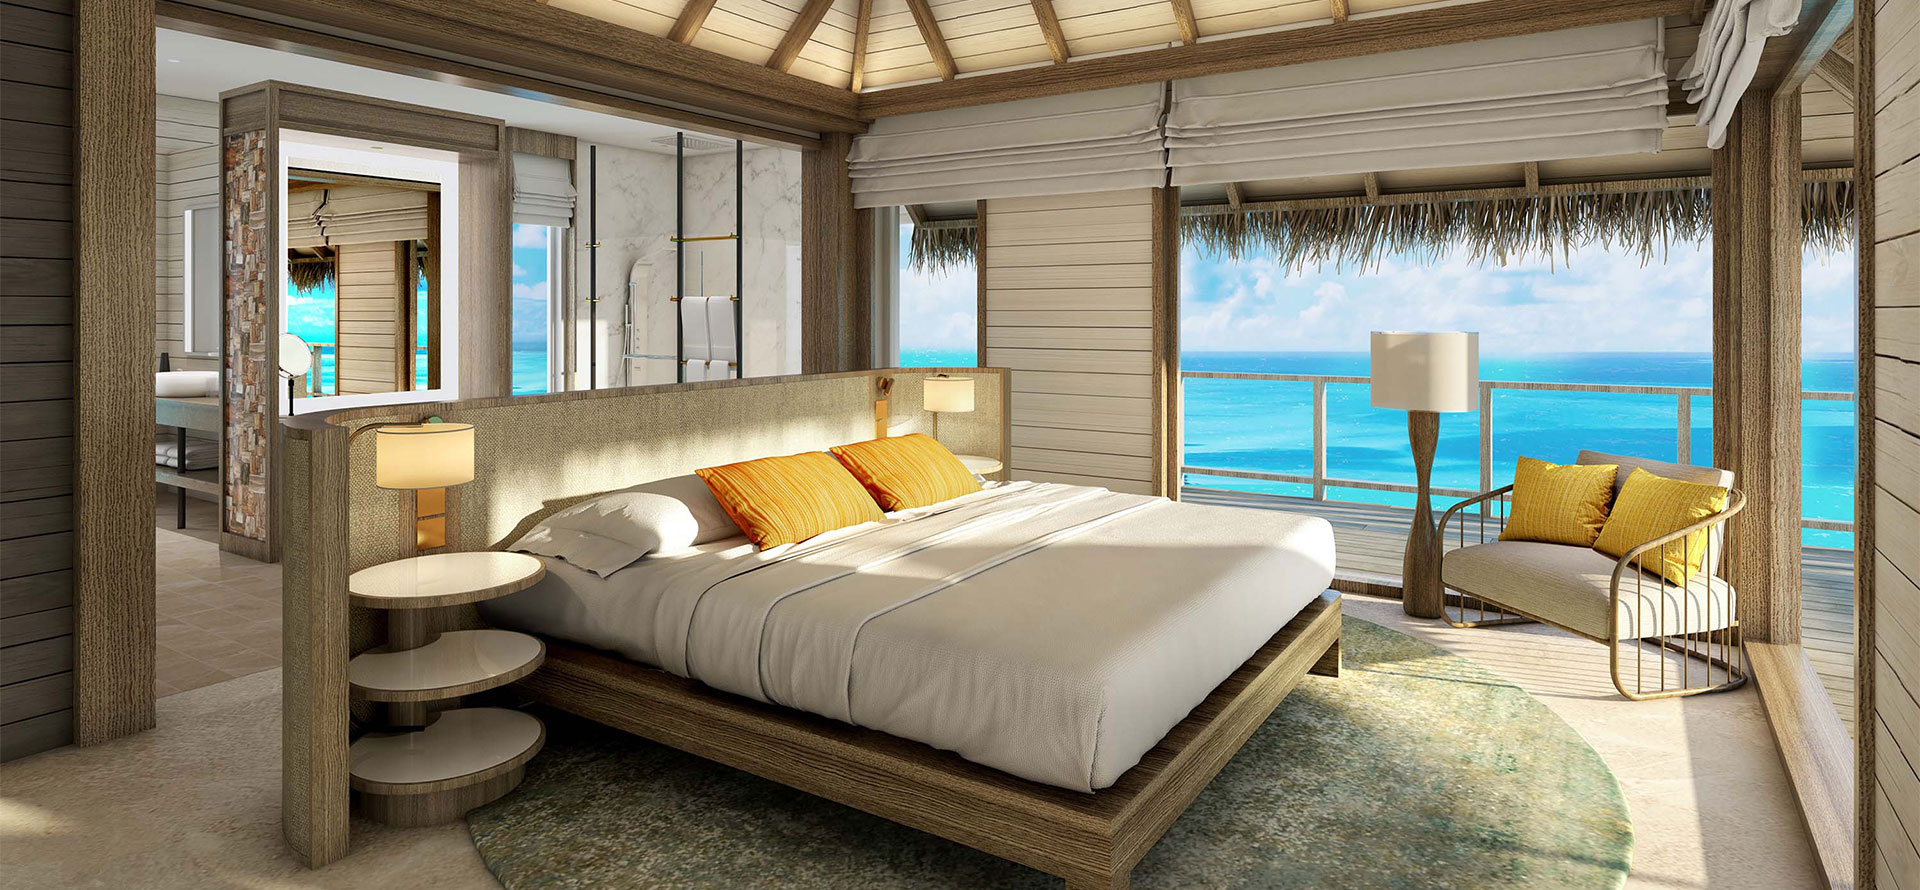 Room in Maldives all-inclusive adults only resort.